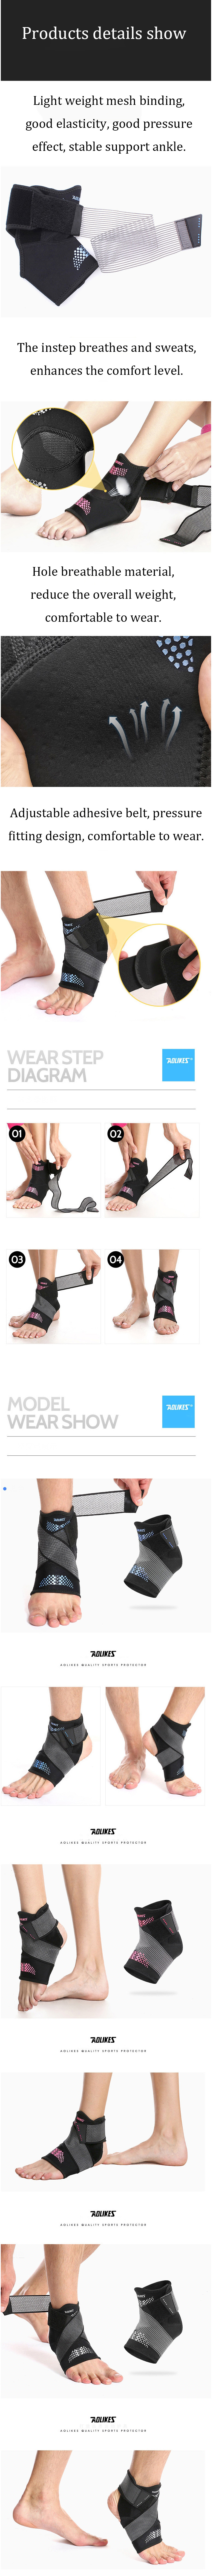 AOLIKES-1PC-Comfortable-Breathable-Ankle-Support-Sports-Running-Ankle-Guard-Fitness-Protection-1600661-2